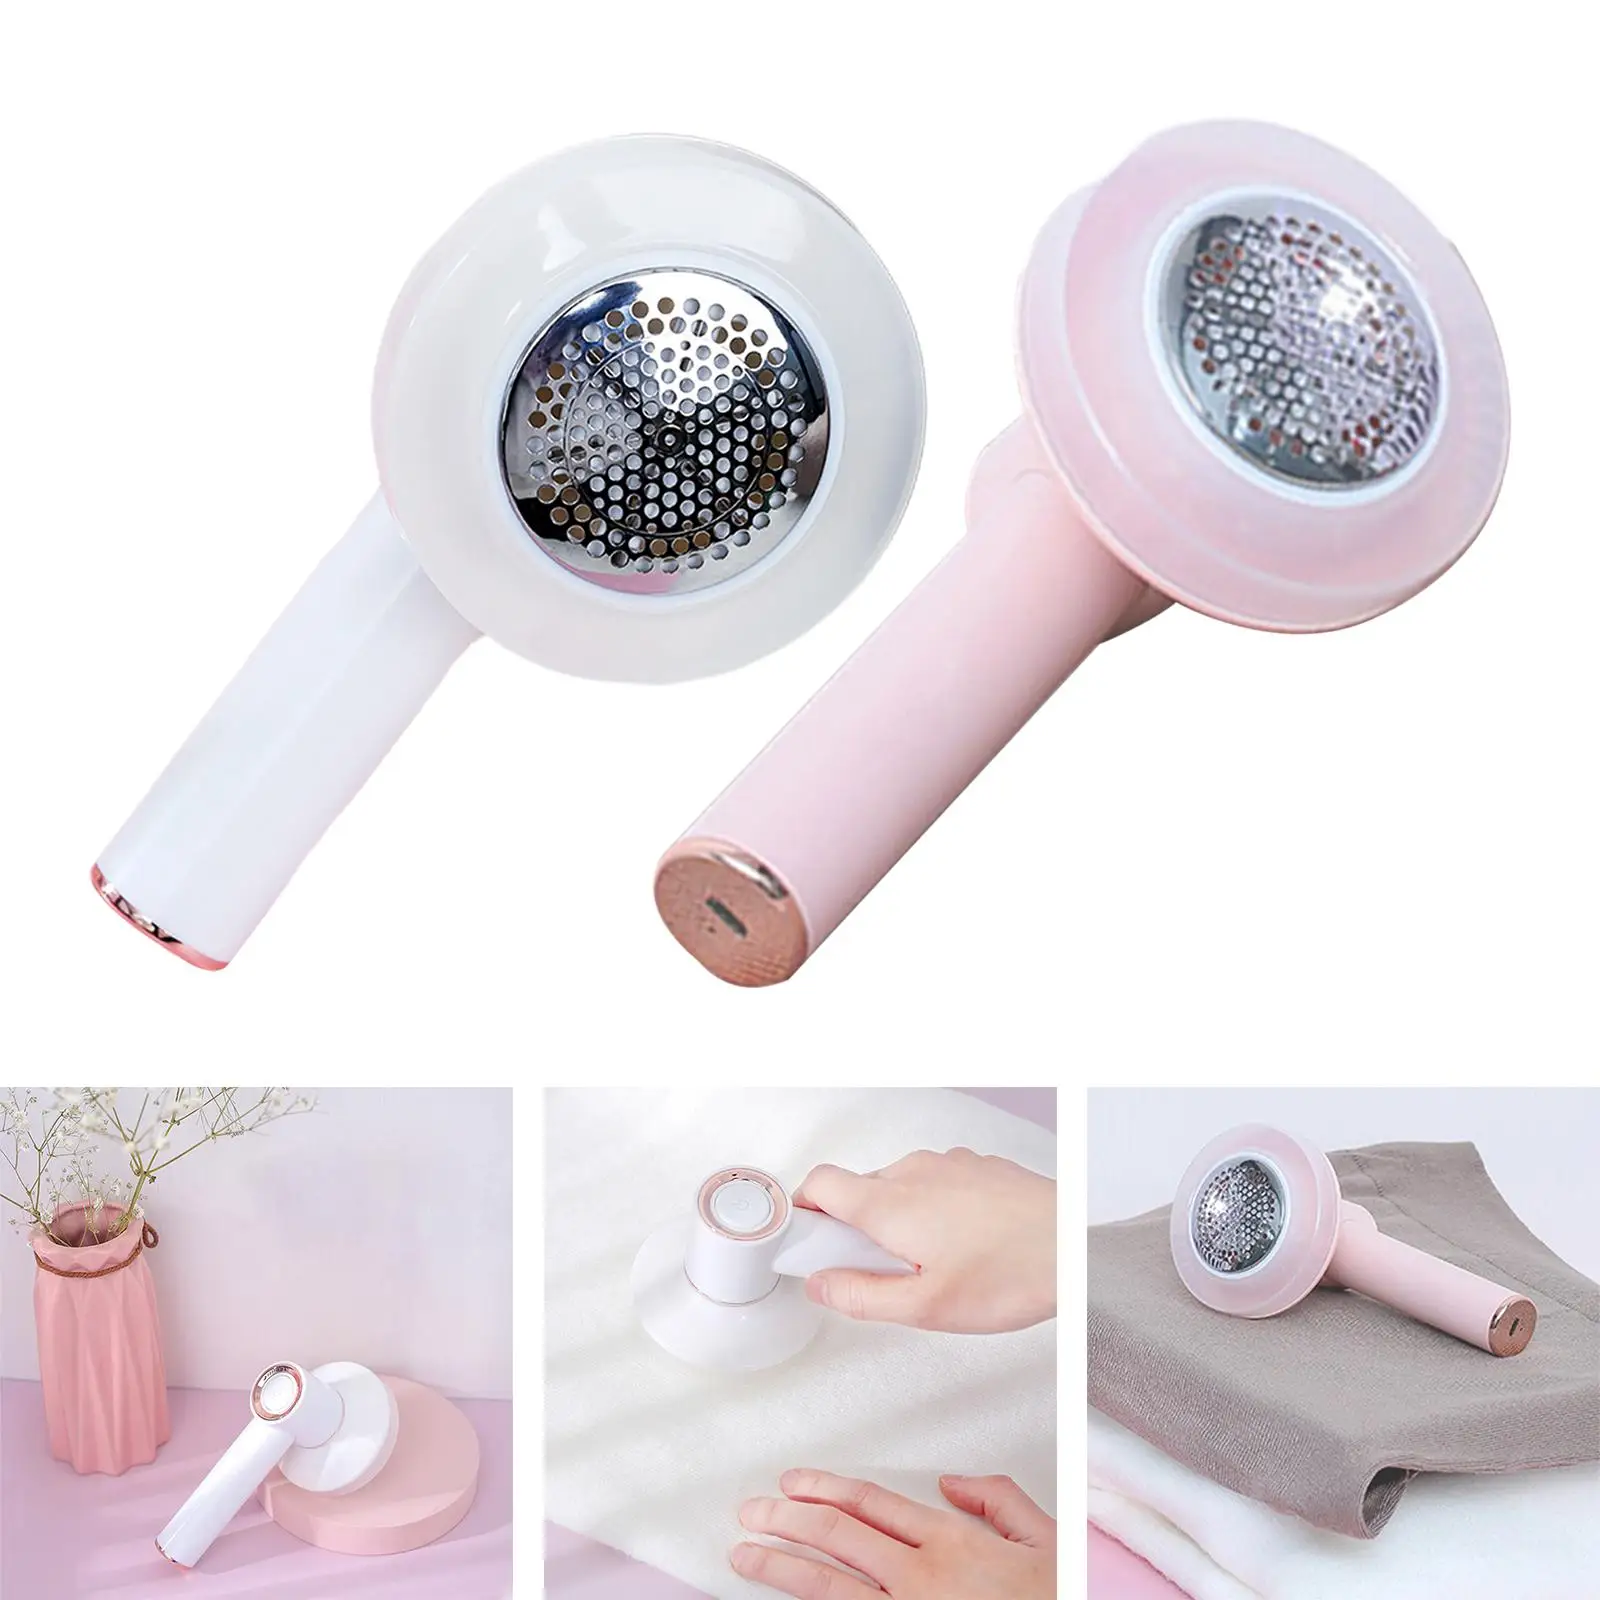 Portable Handheld Fabric Ball Fuzz Remover USB Charging Remove Fuzz for Clothes, Couch Comfortable Grip Convenient to Carry